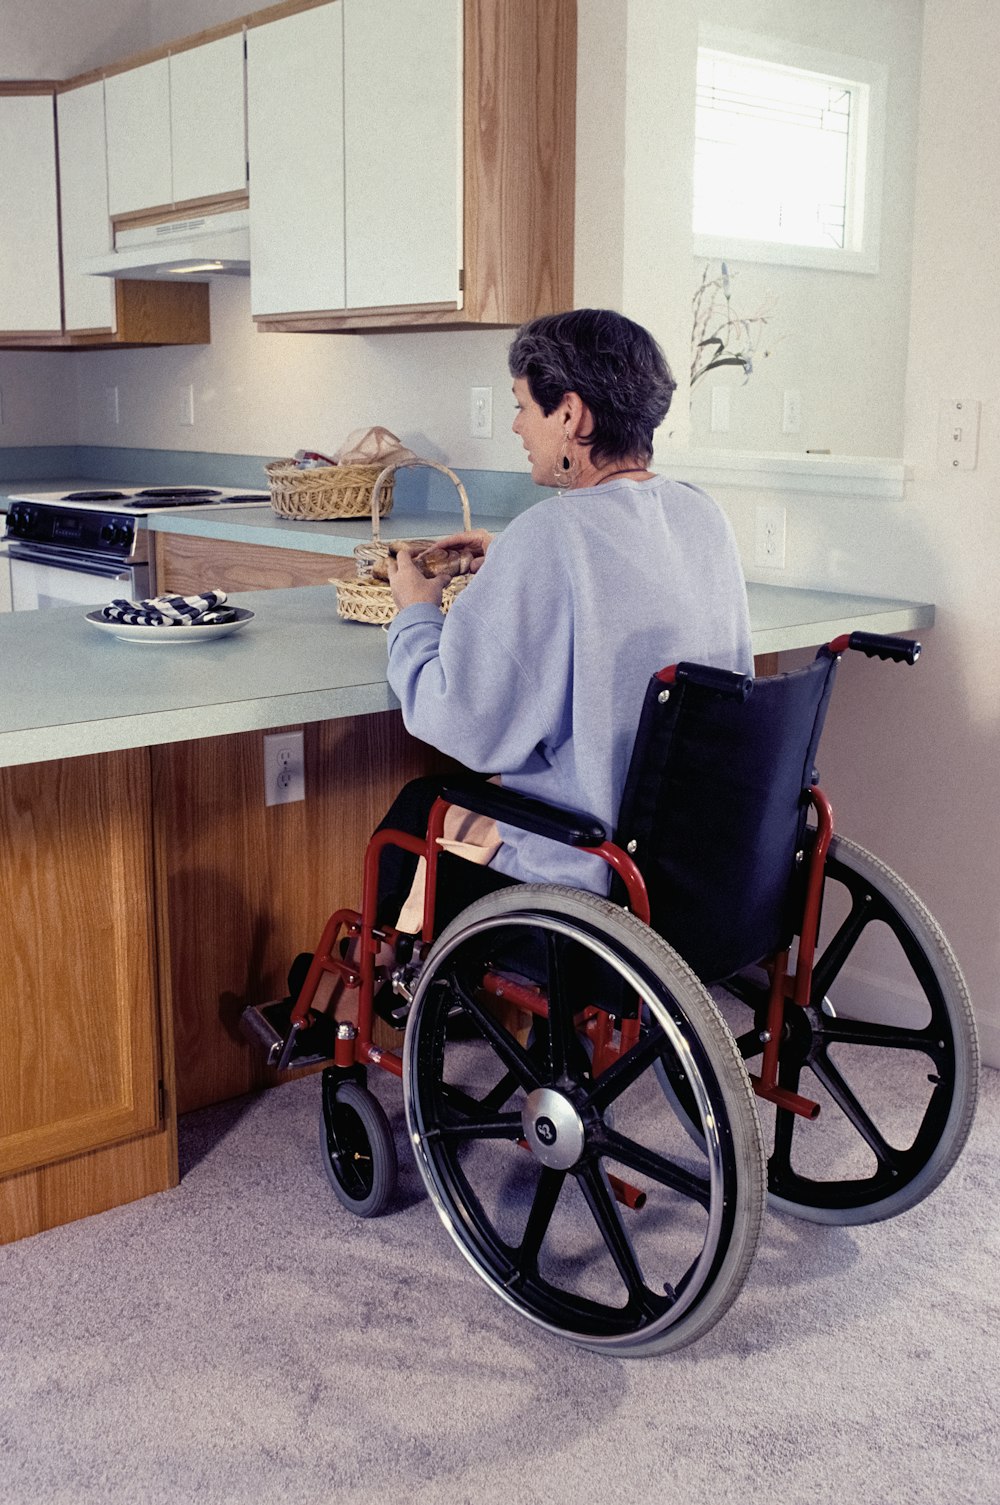 a woman in a wheel chair in a kitchen